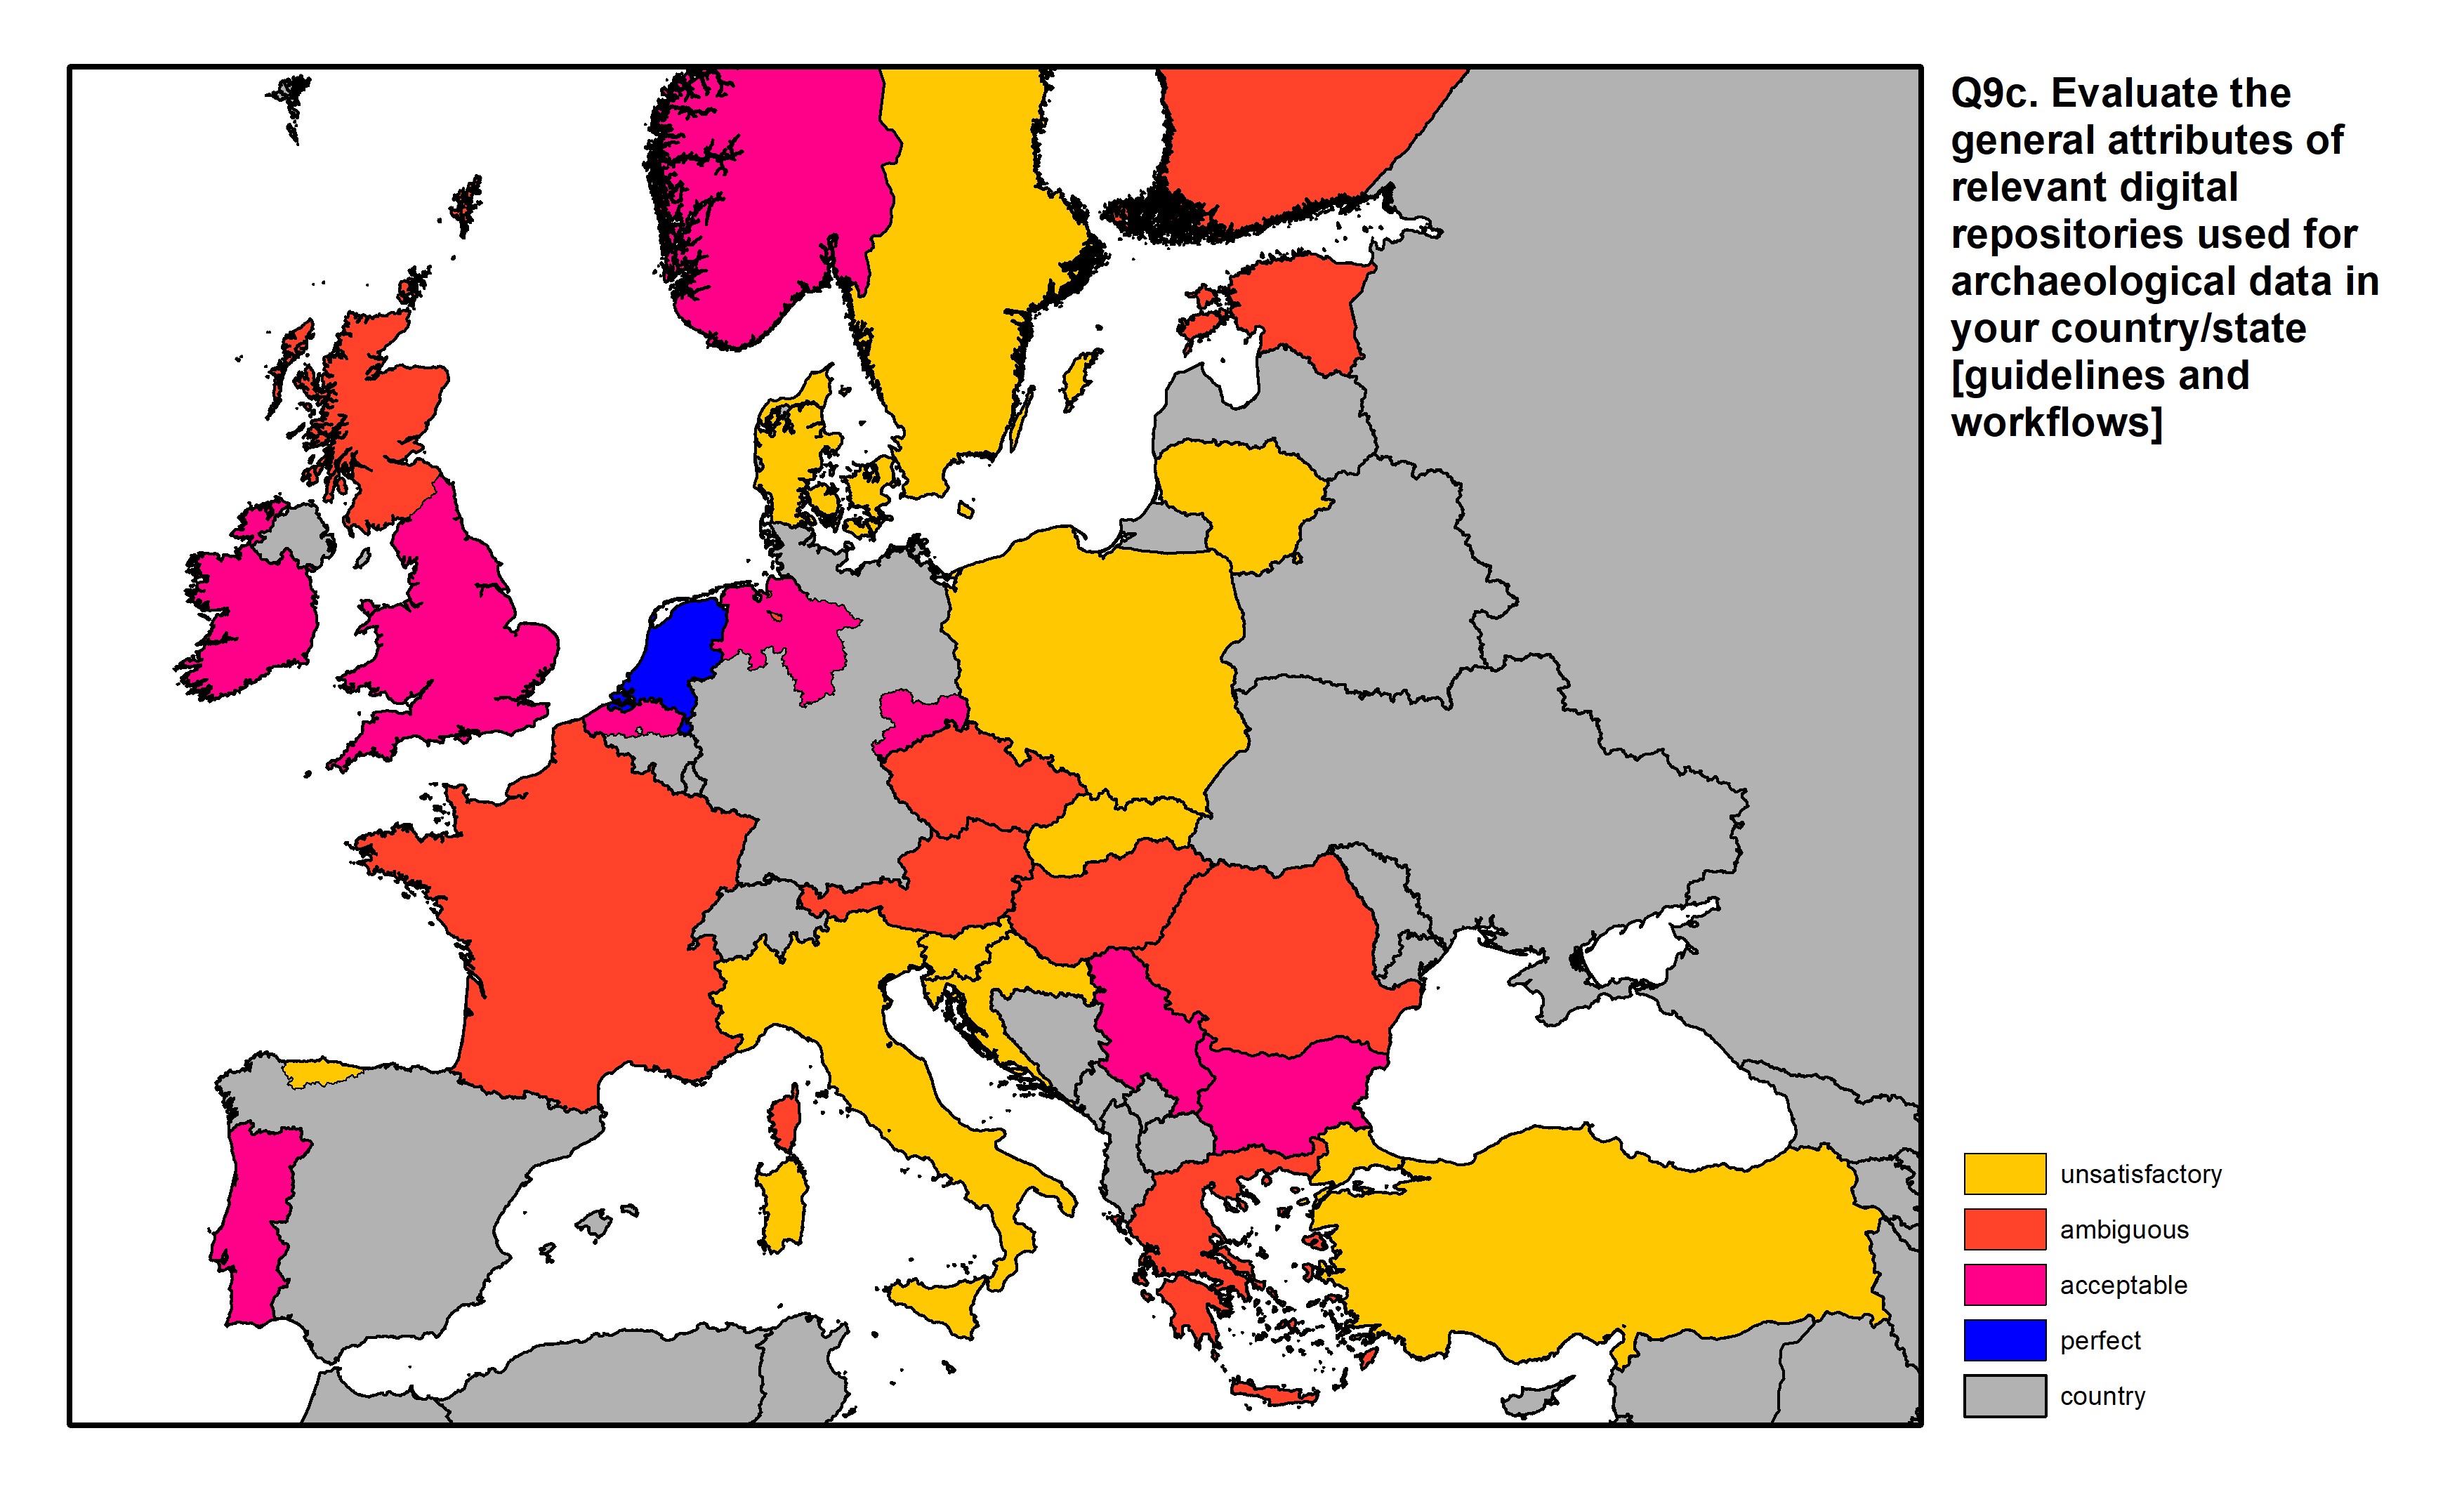 Figure 29: a map of Europe showing countries and regions in colour based on response rates to the survey question.